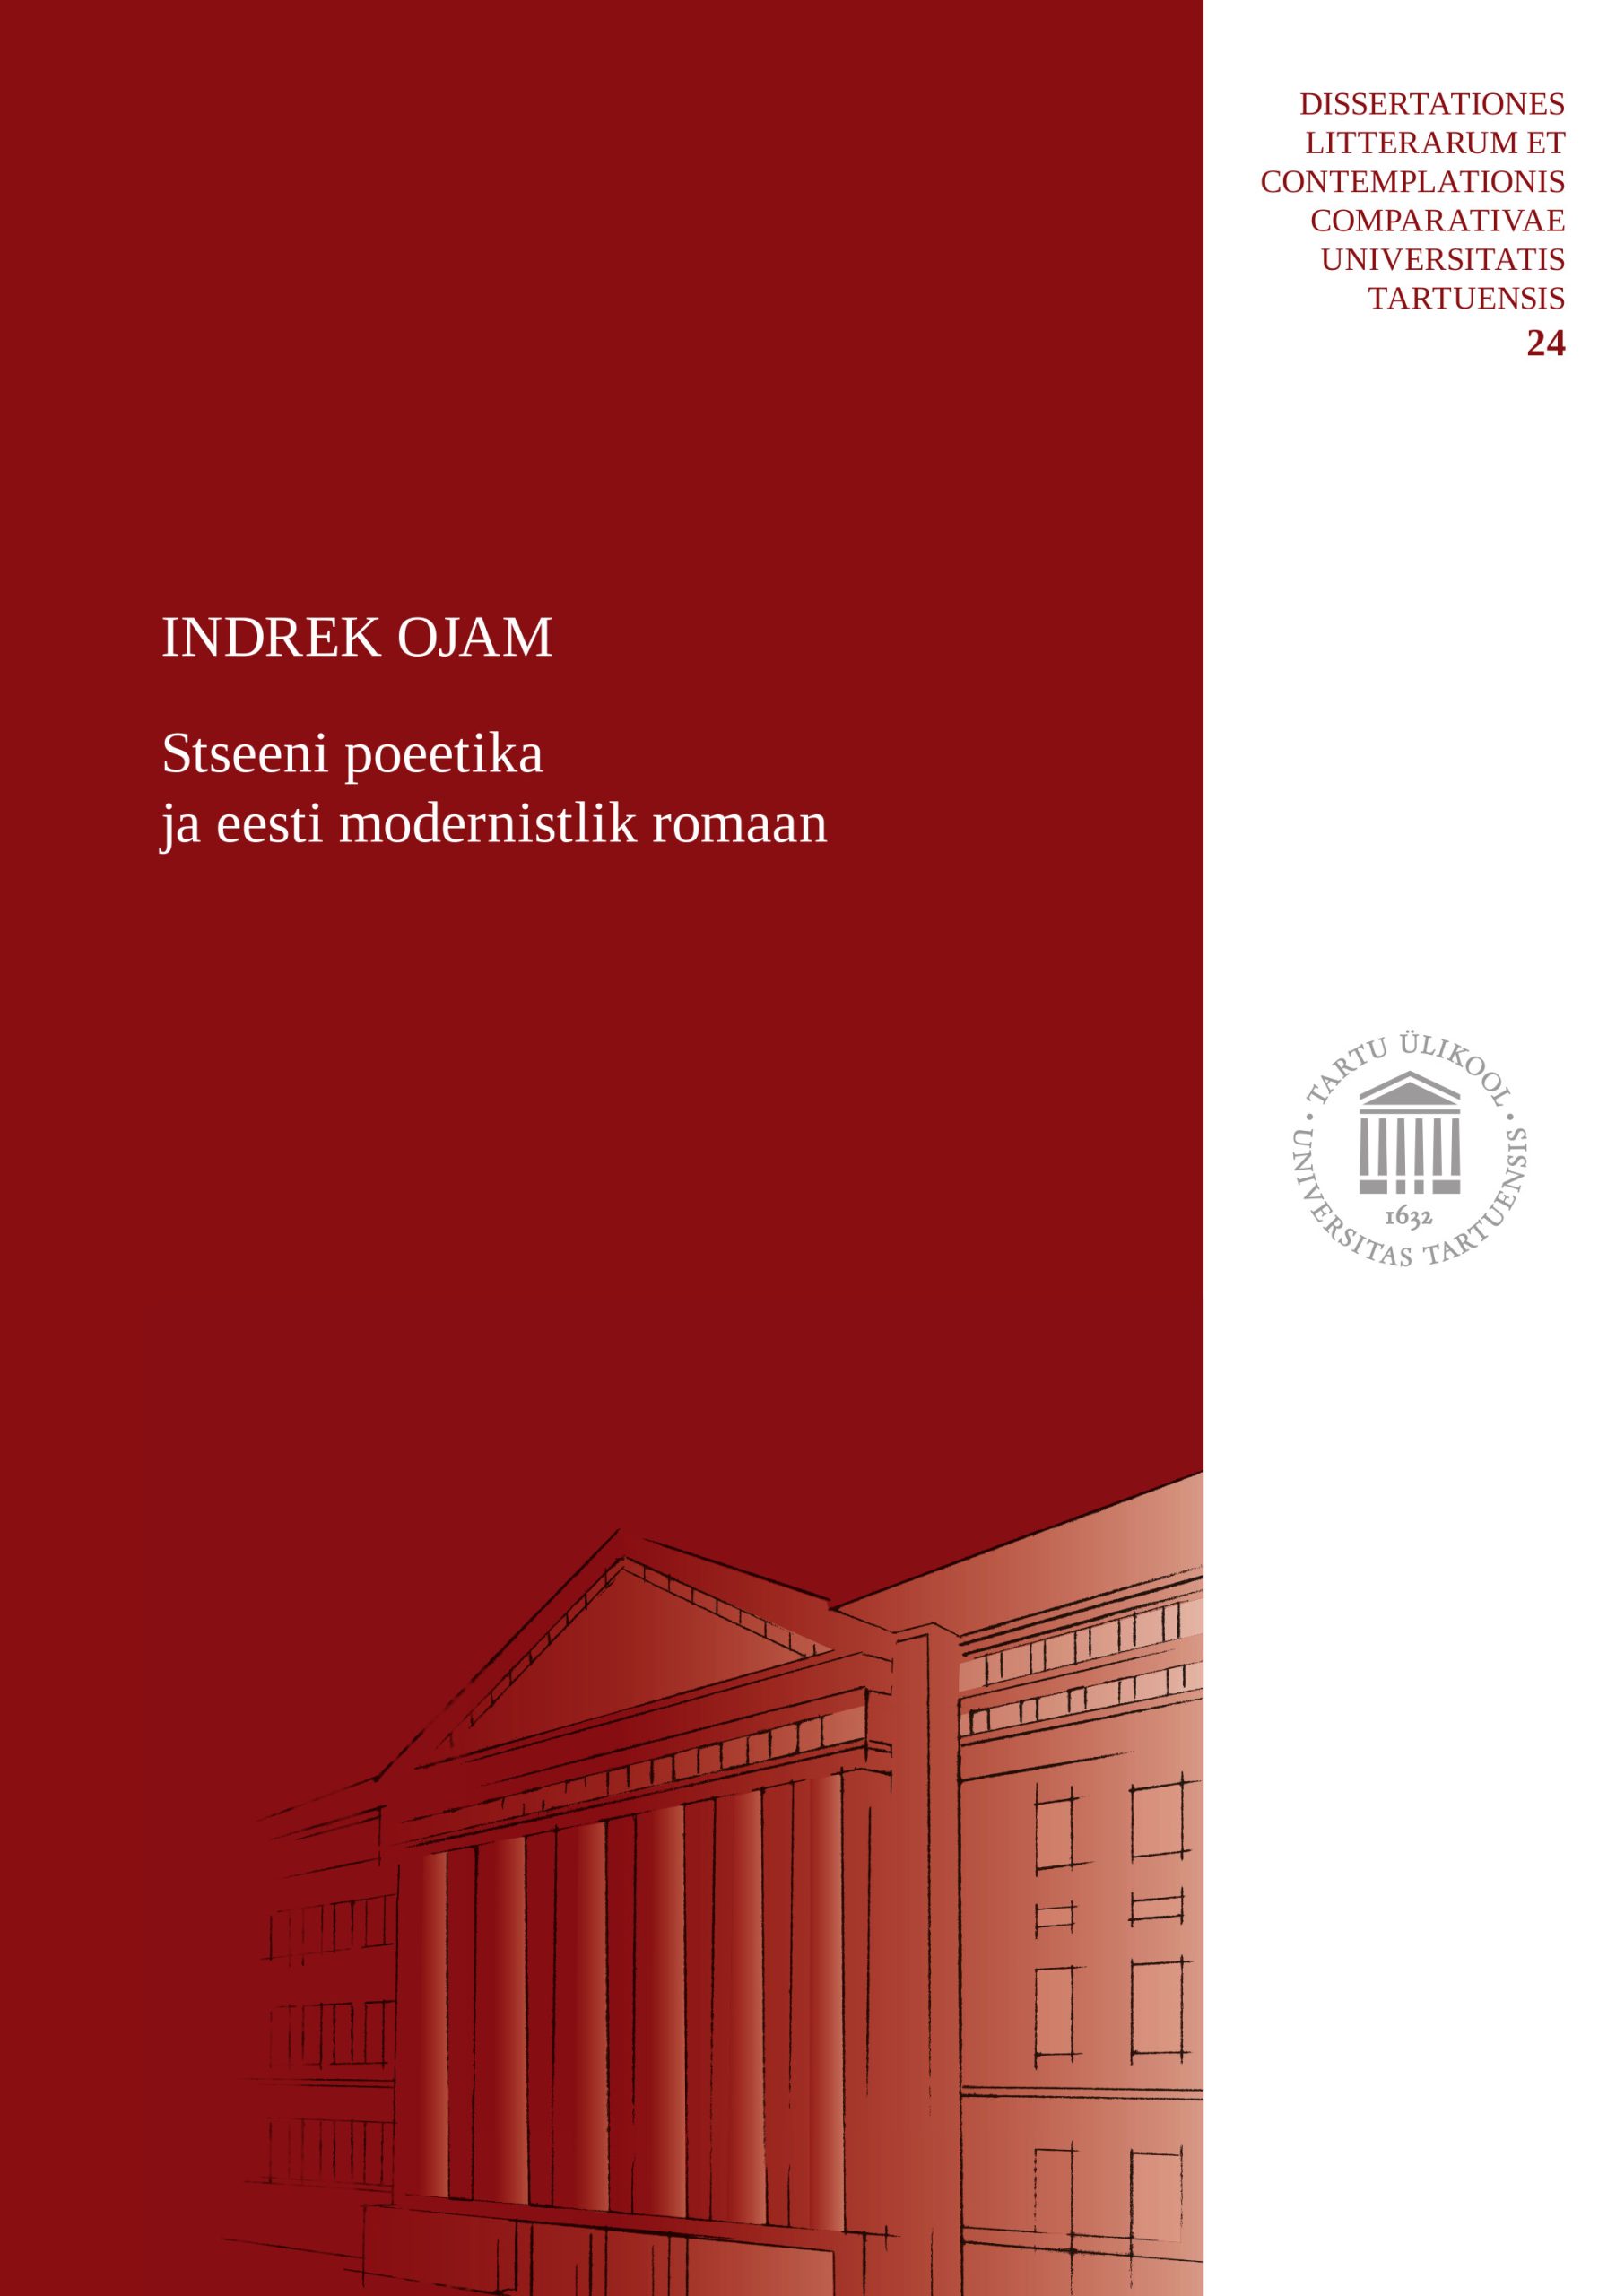 Indrek Ojam will defend his doctoral thesis “The Poetics of Scene and Estonian Modernist Novel”